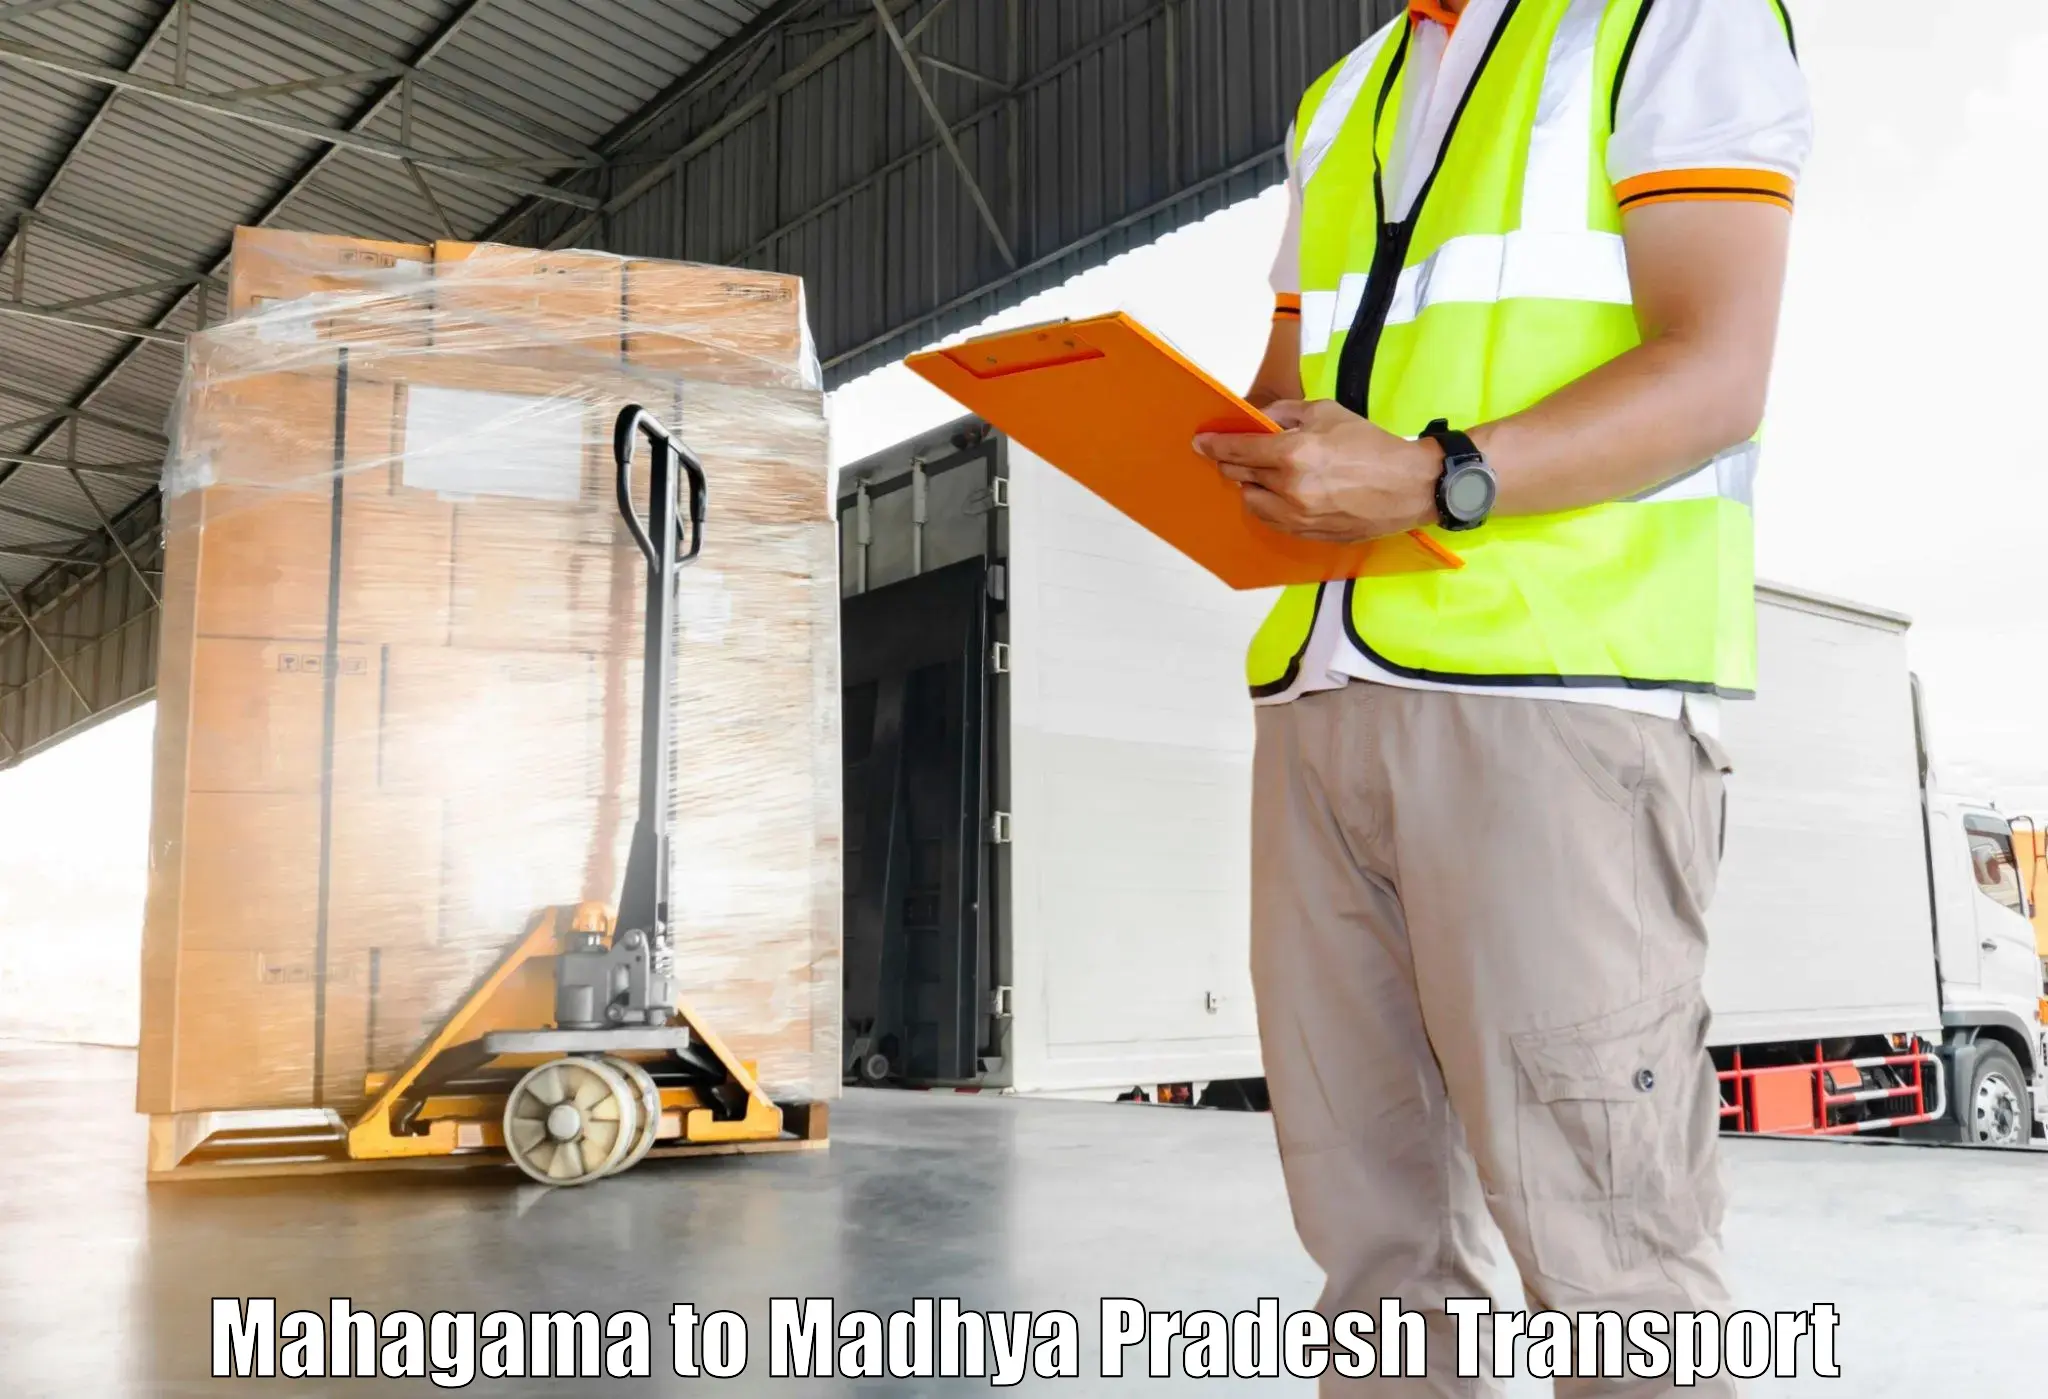 Container transport service Mahagama to Damoh